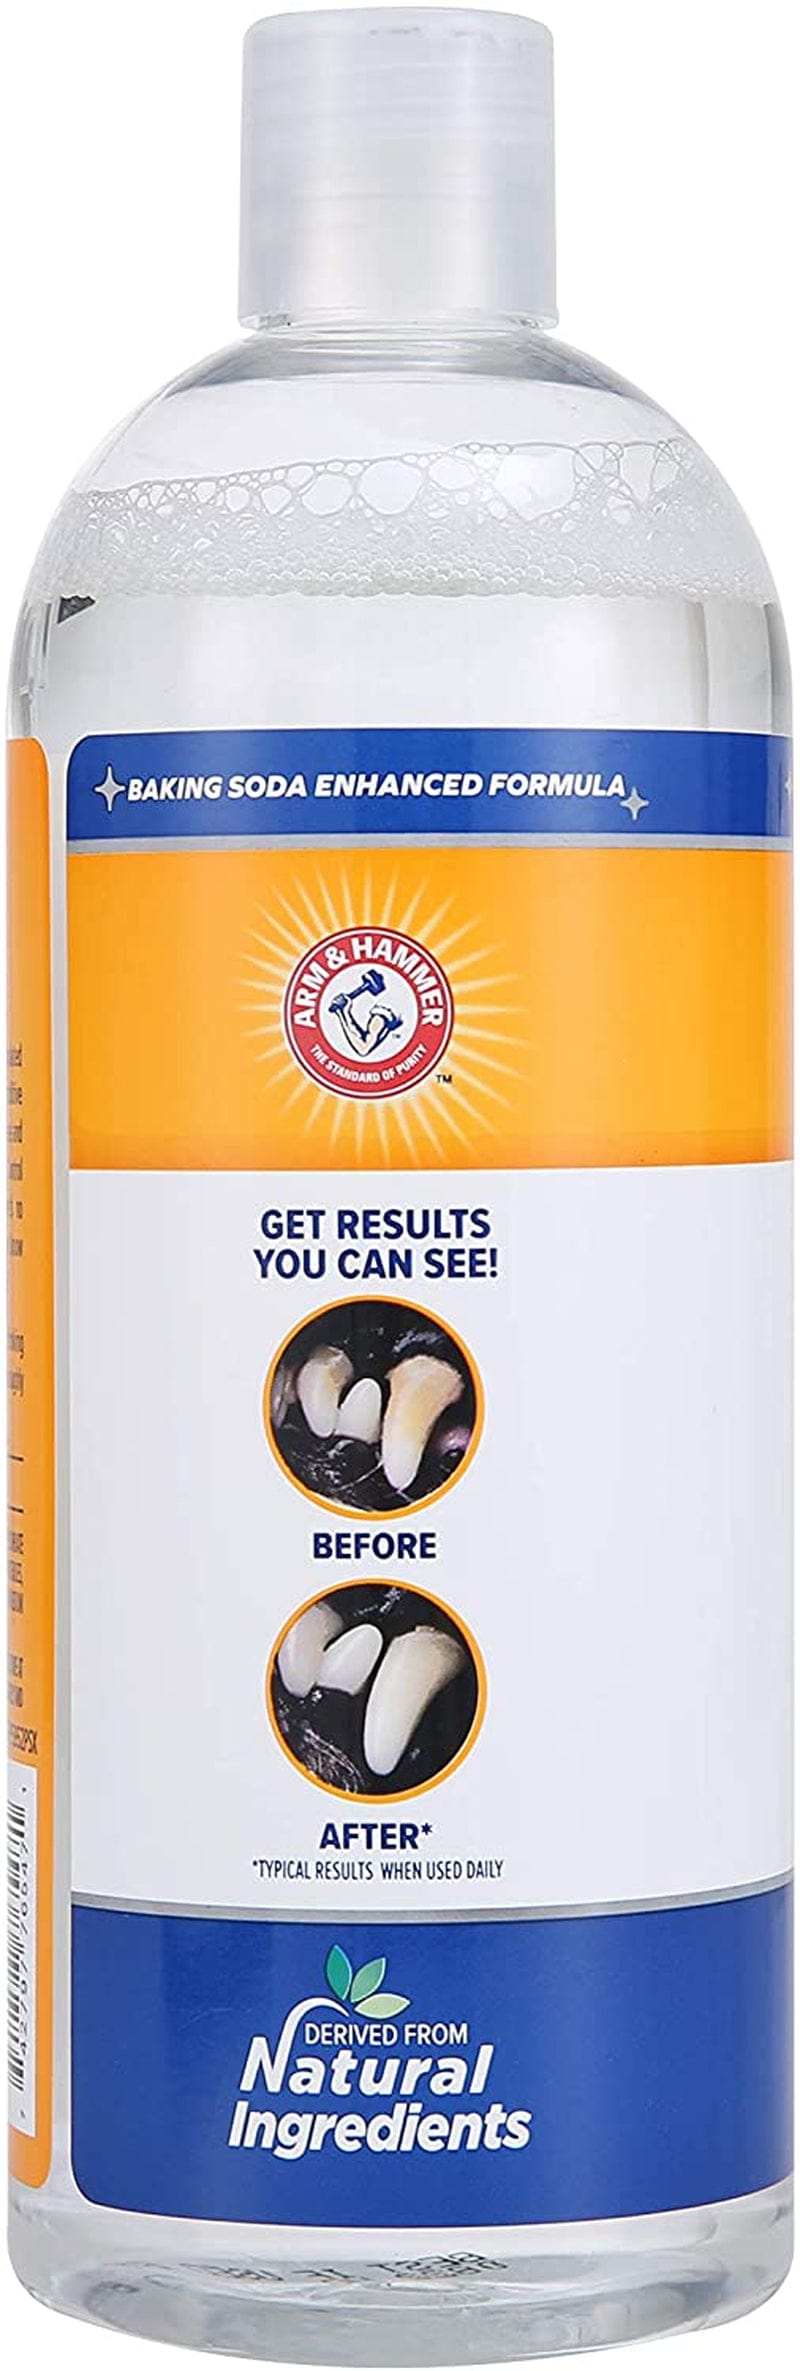 Arm & Hammer for Pets Dental Water Additive for Dogs, Tartar Control | Dog Dental Care Reduces Plaque & Tartar Buildup without Brushing | 16 Fl Oz (Pack of 1), Odorless and Flavorless